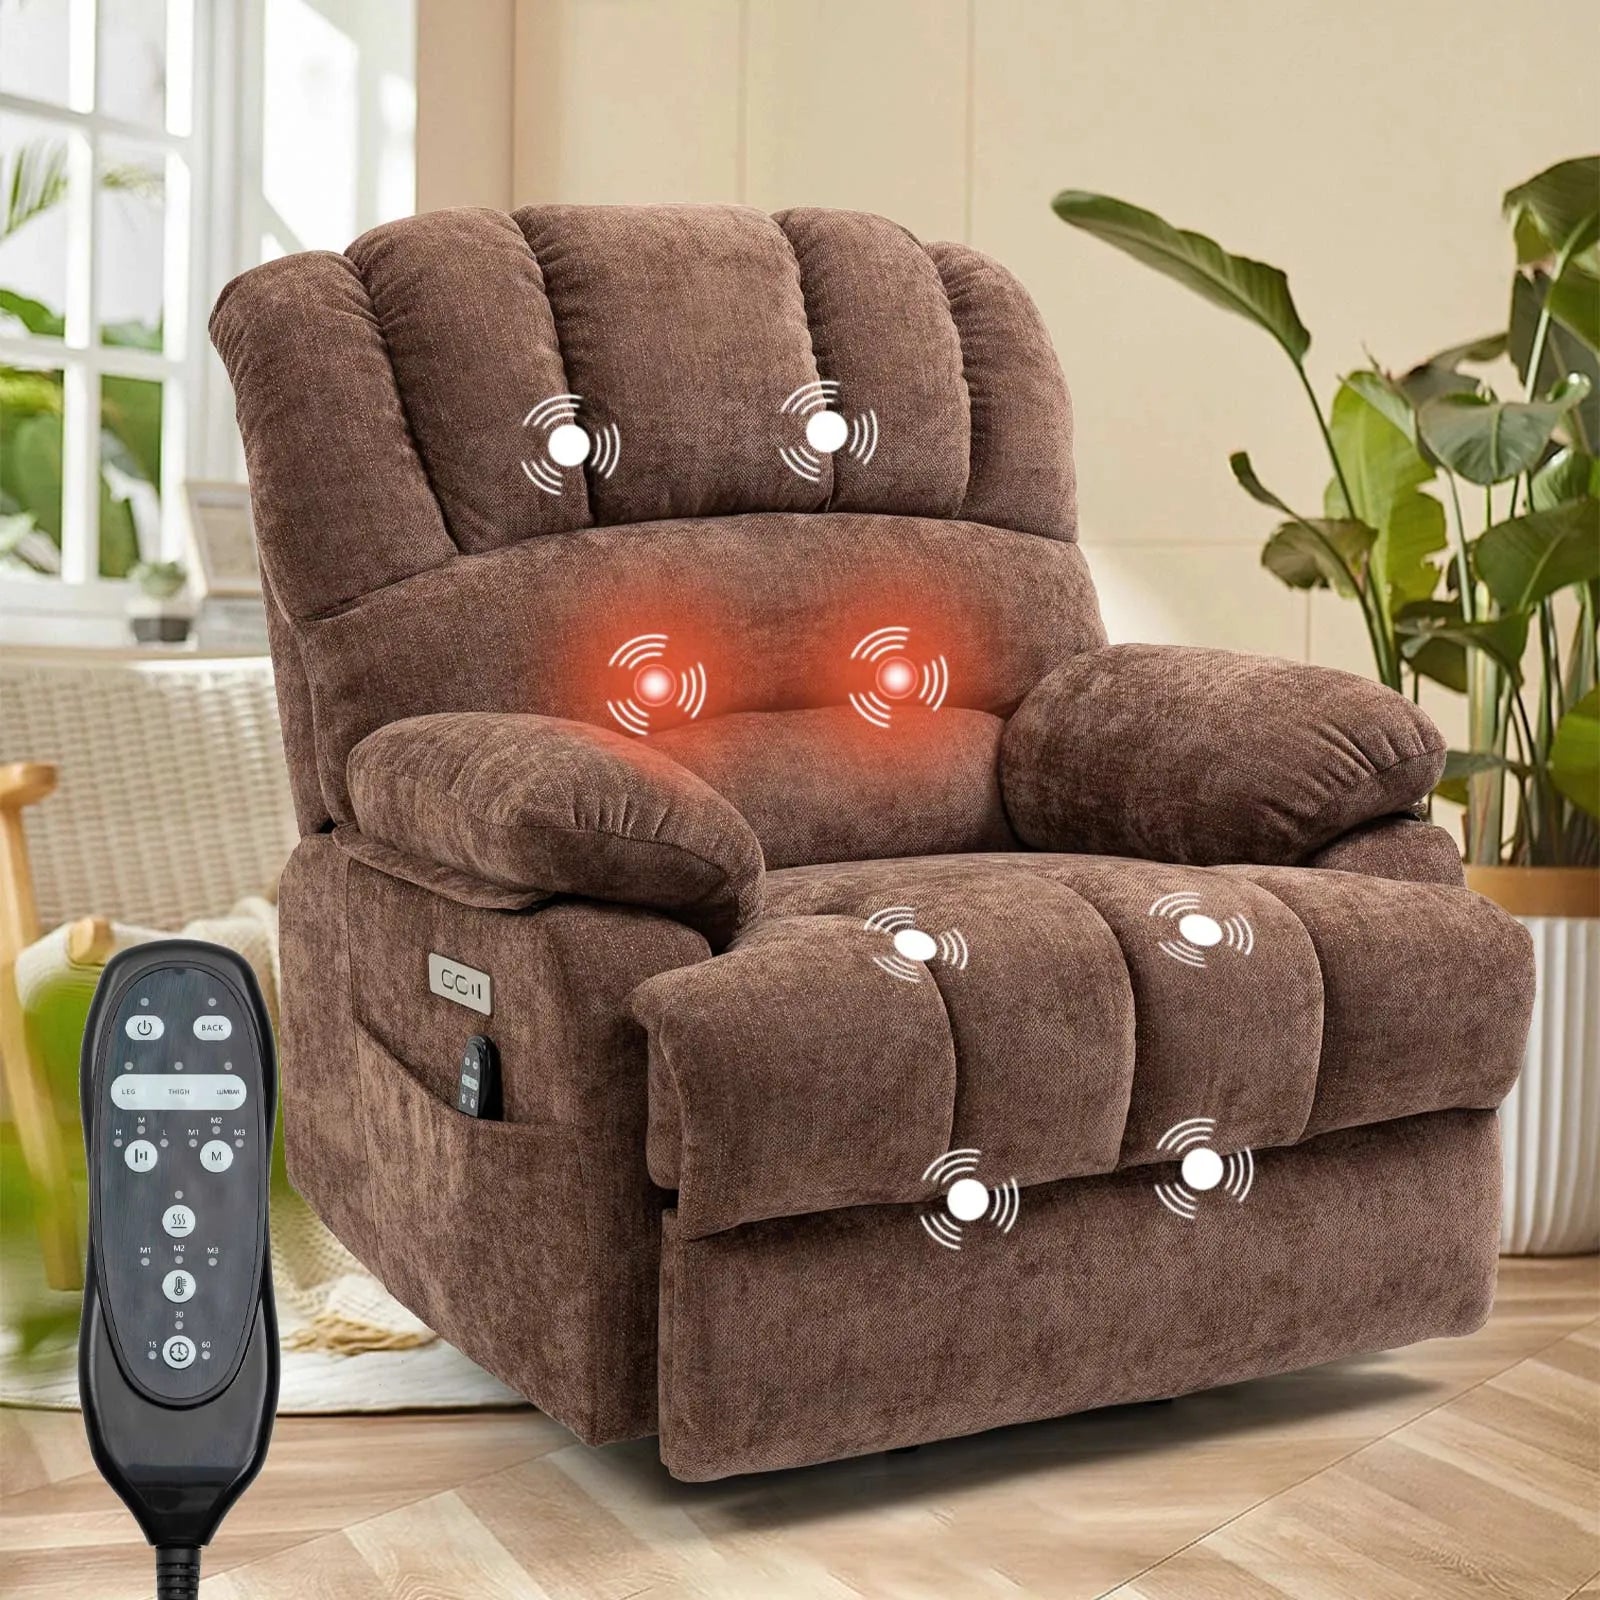 Power Lift Remote Recliner Chair for Elderly, Linen Fabric Upholstery,  Brown